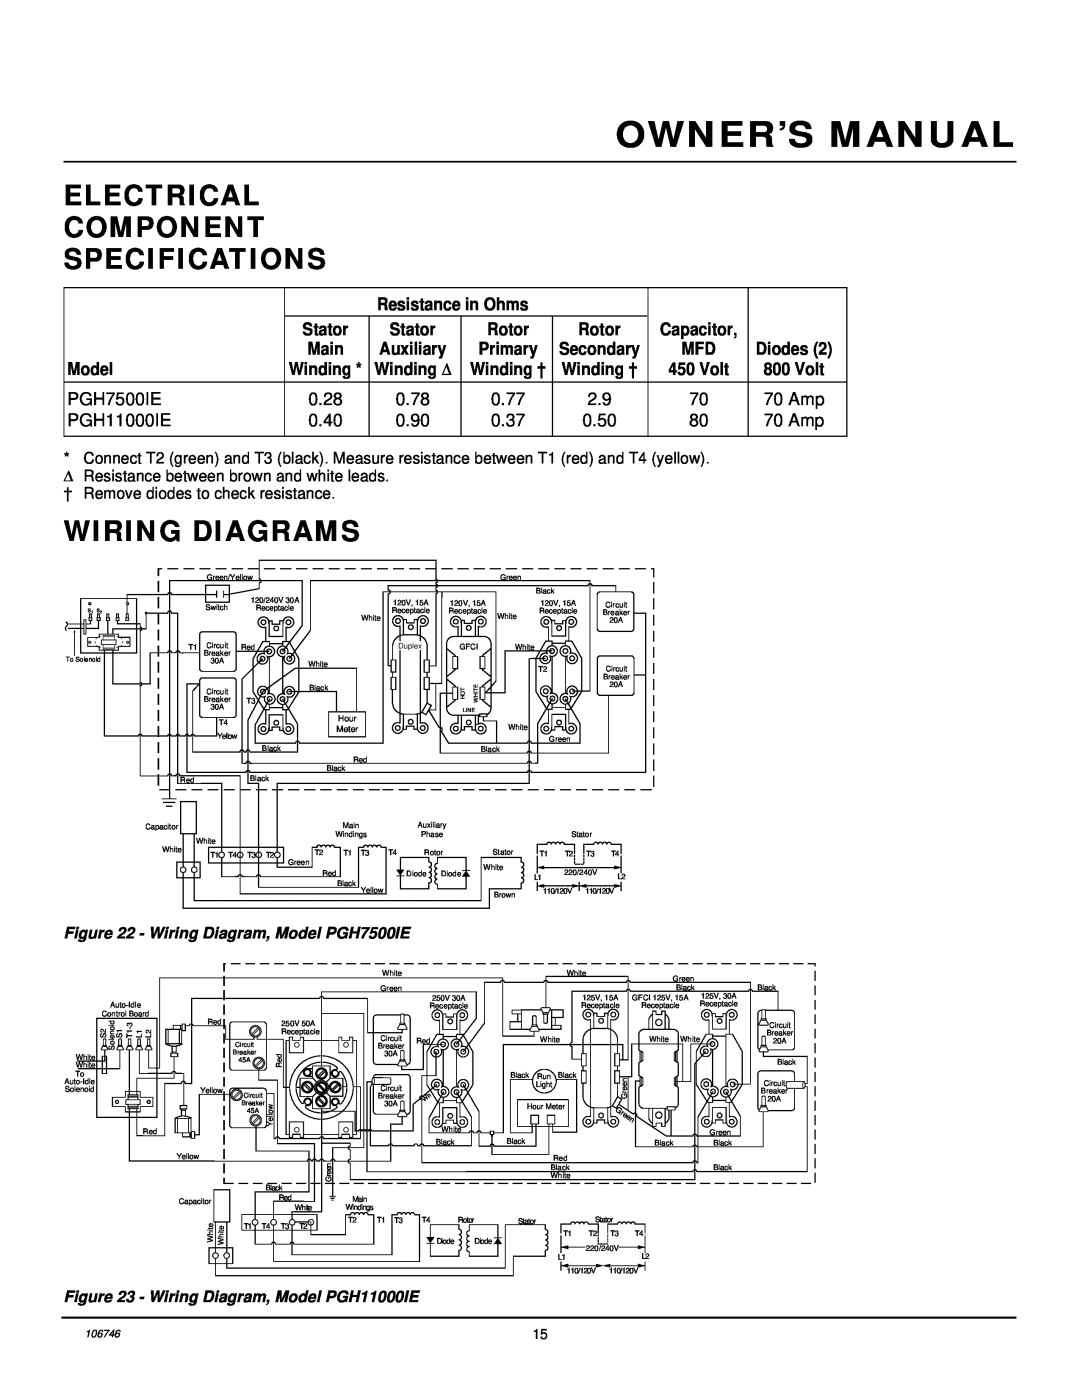 Desa PGH7500IE, PGH1100IE Electrical Component Specifications, Wiring Diagrams, Resistance in Ohms, Rotor, Model, Volt 